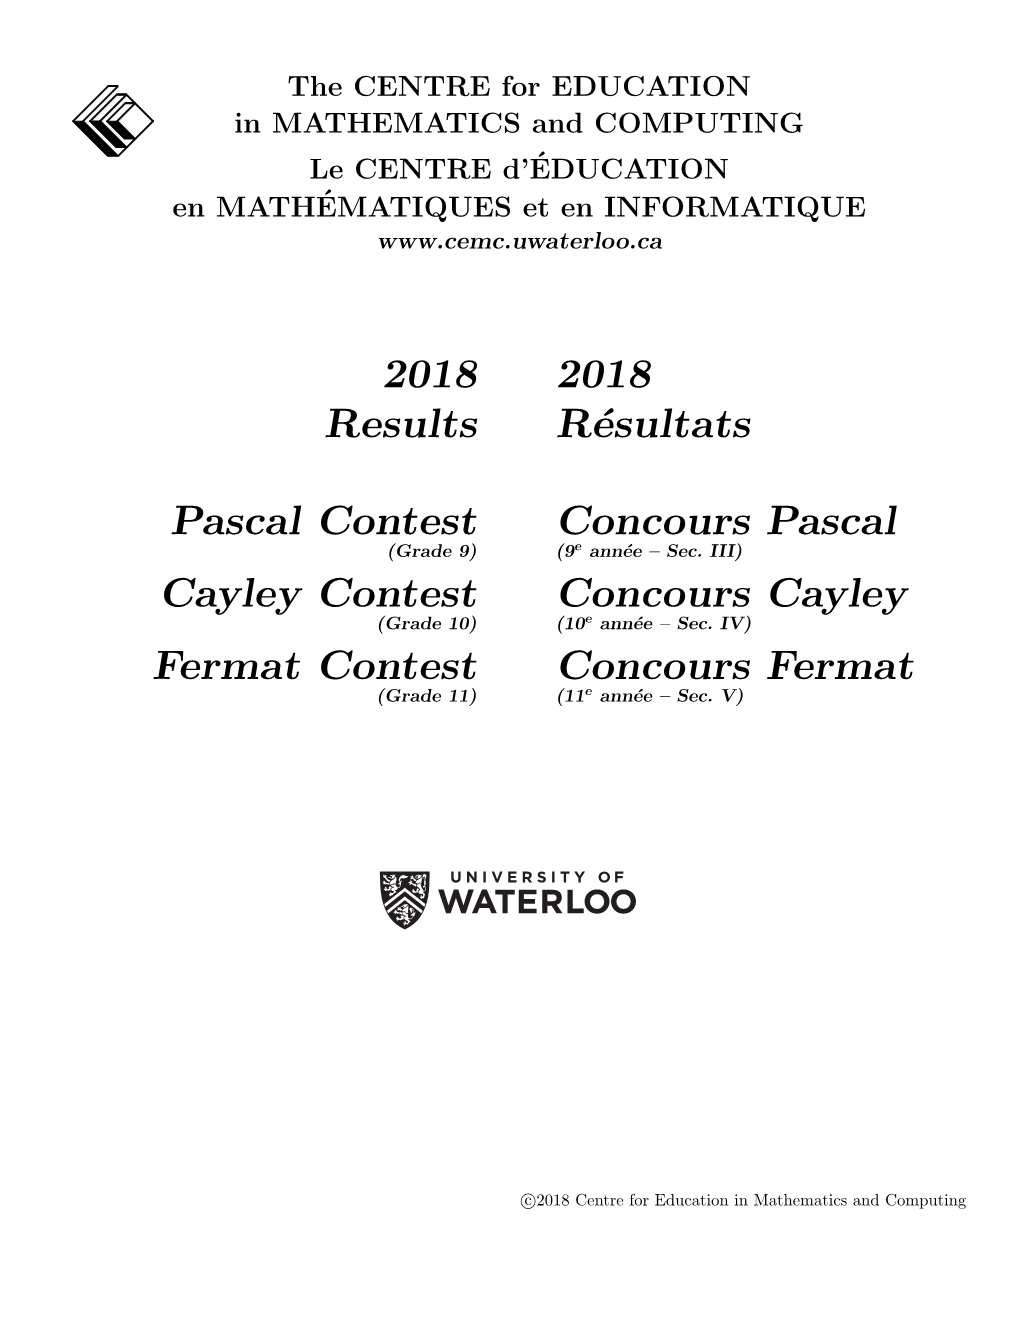 Pascal 2018 Results